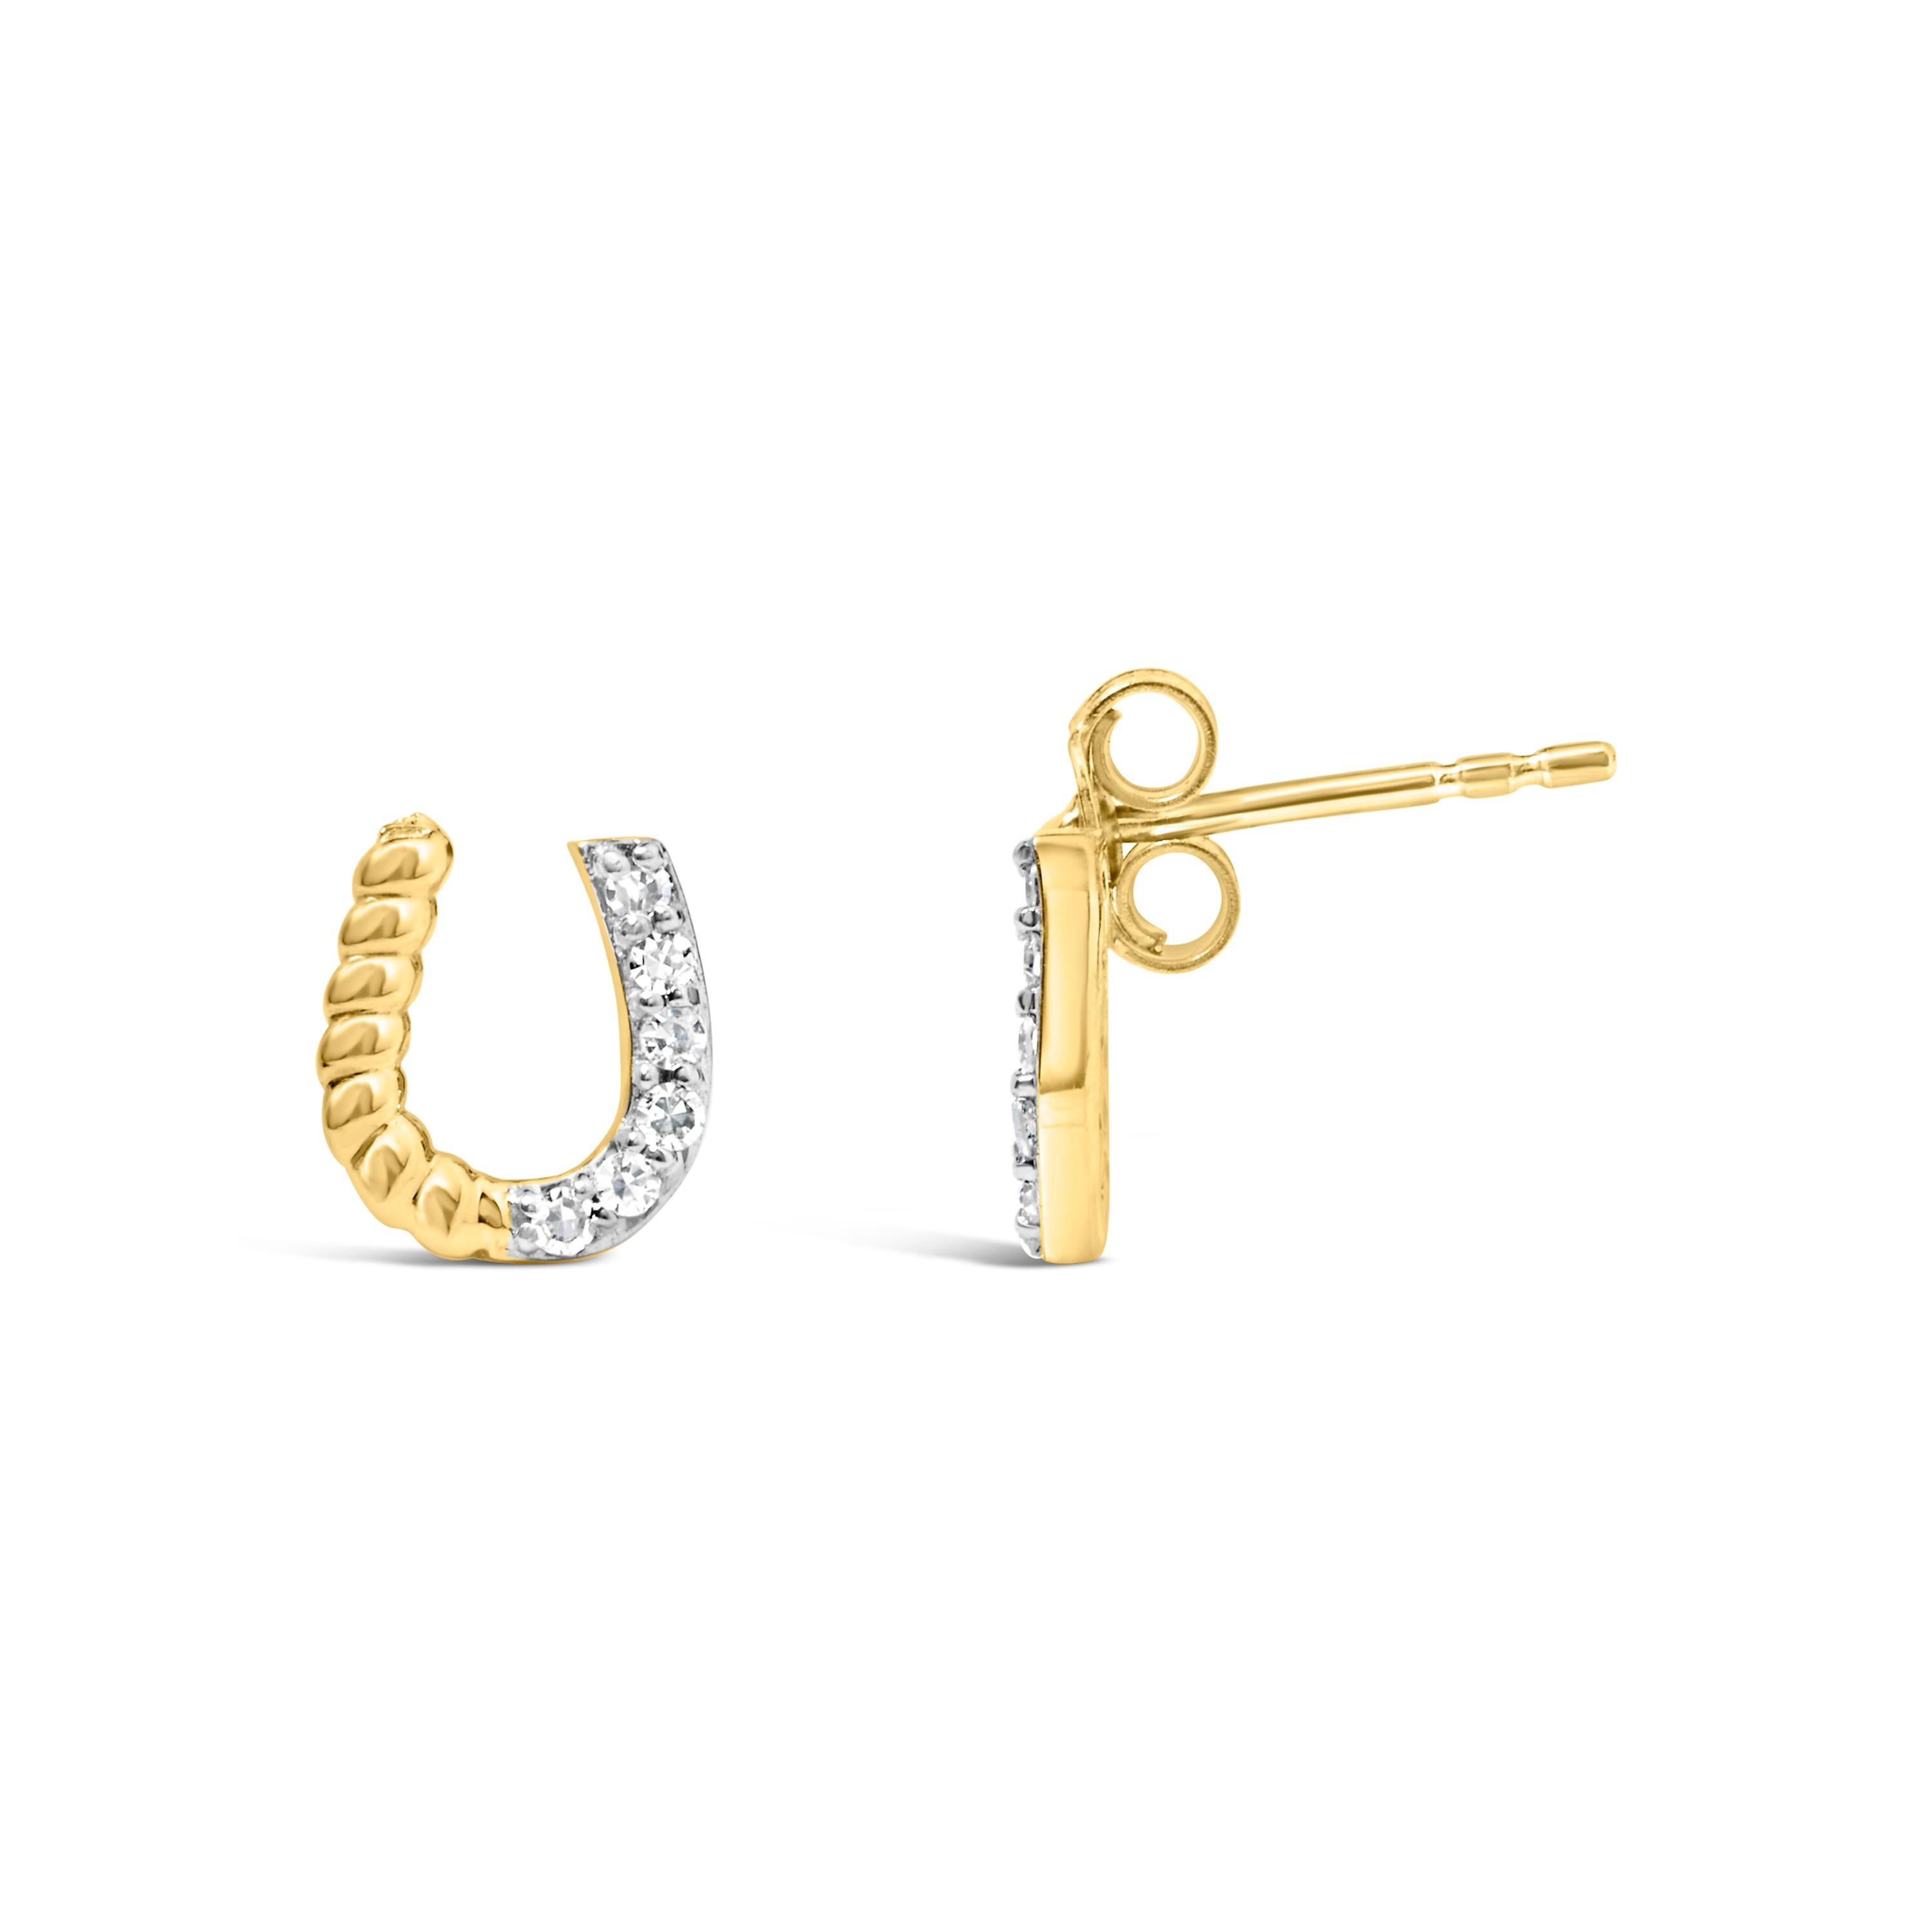 Contemporary 14K Yellow Gold 1/10 Carat Diamond and Braided Horseshoe Stud Earrings For Sale